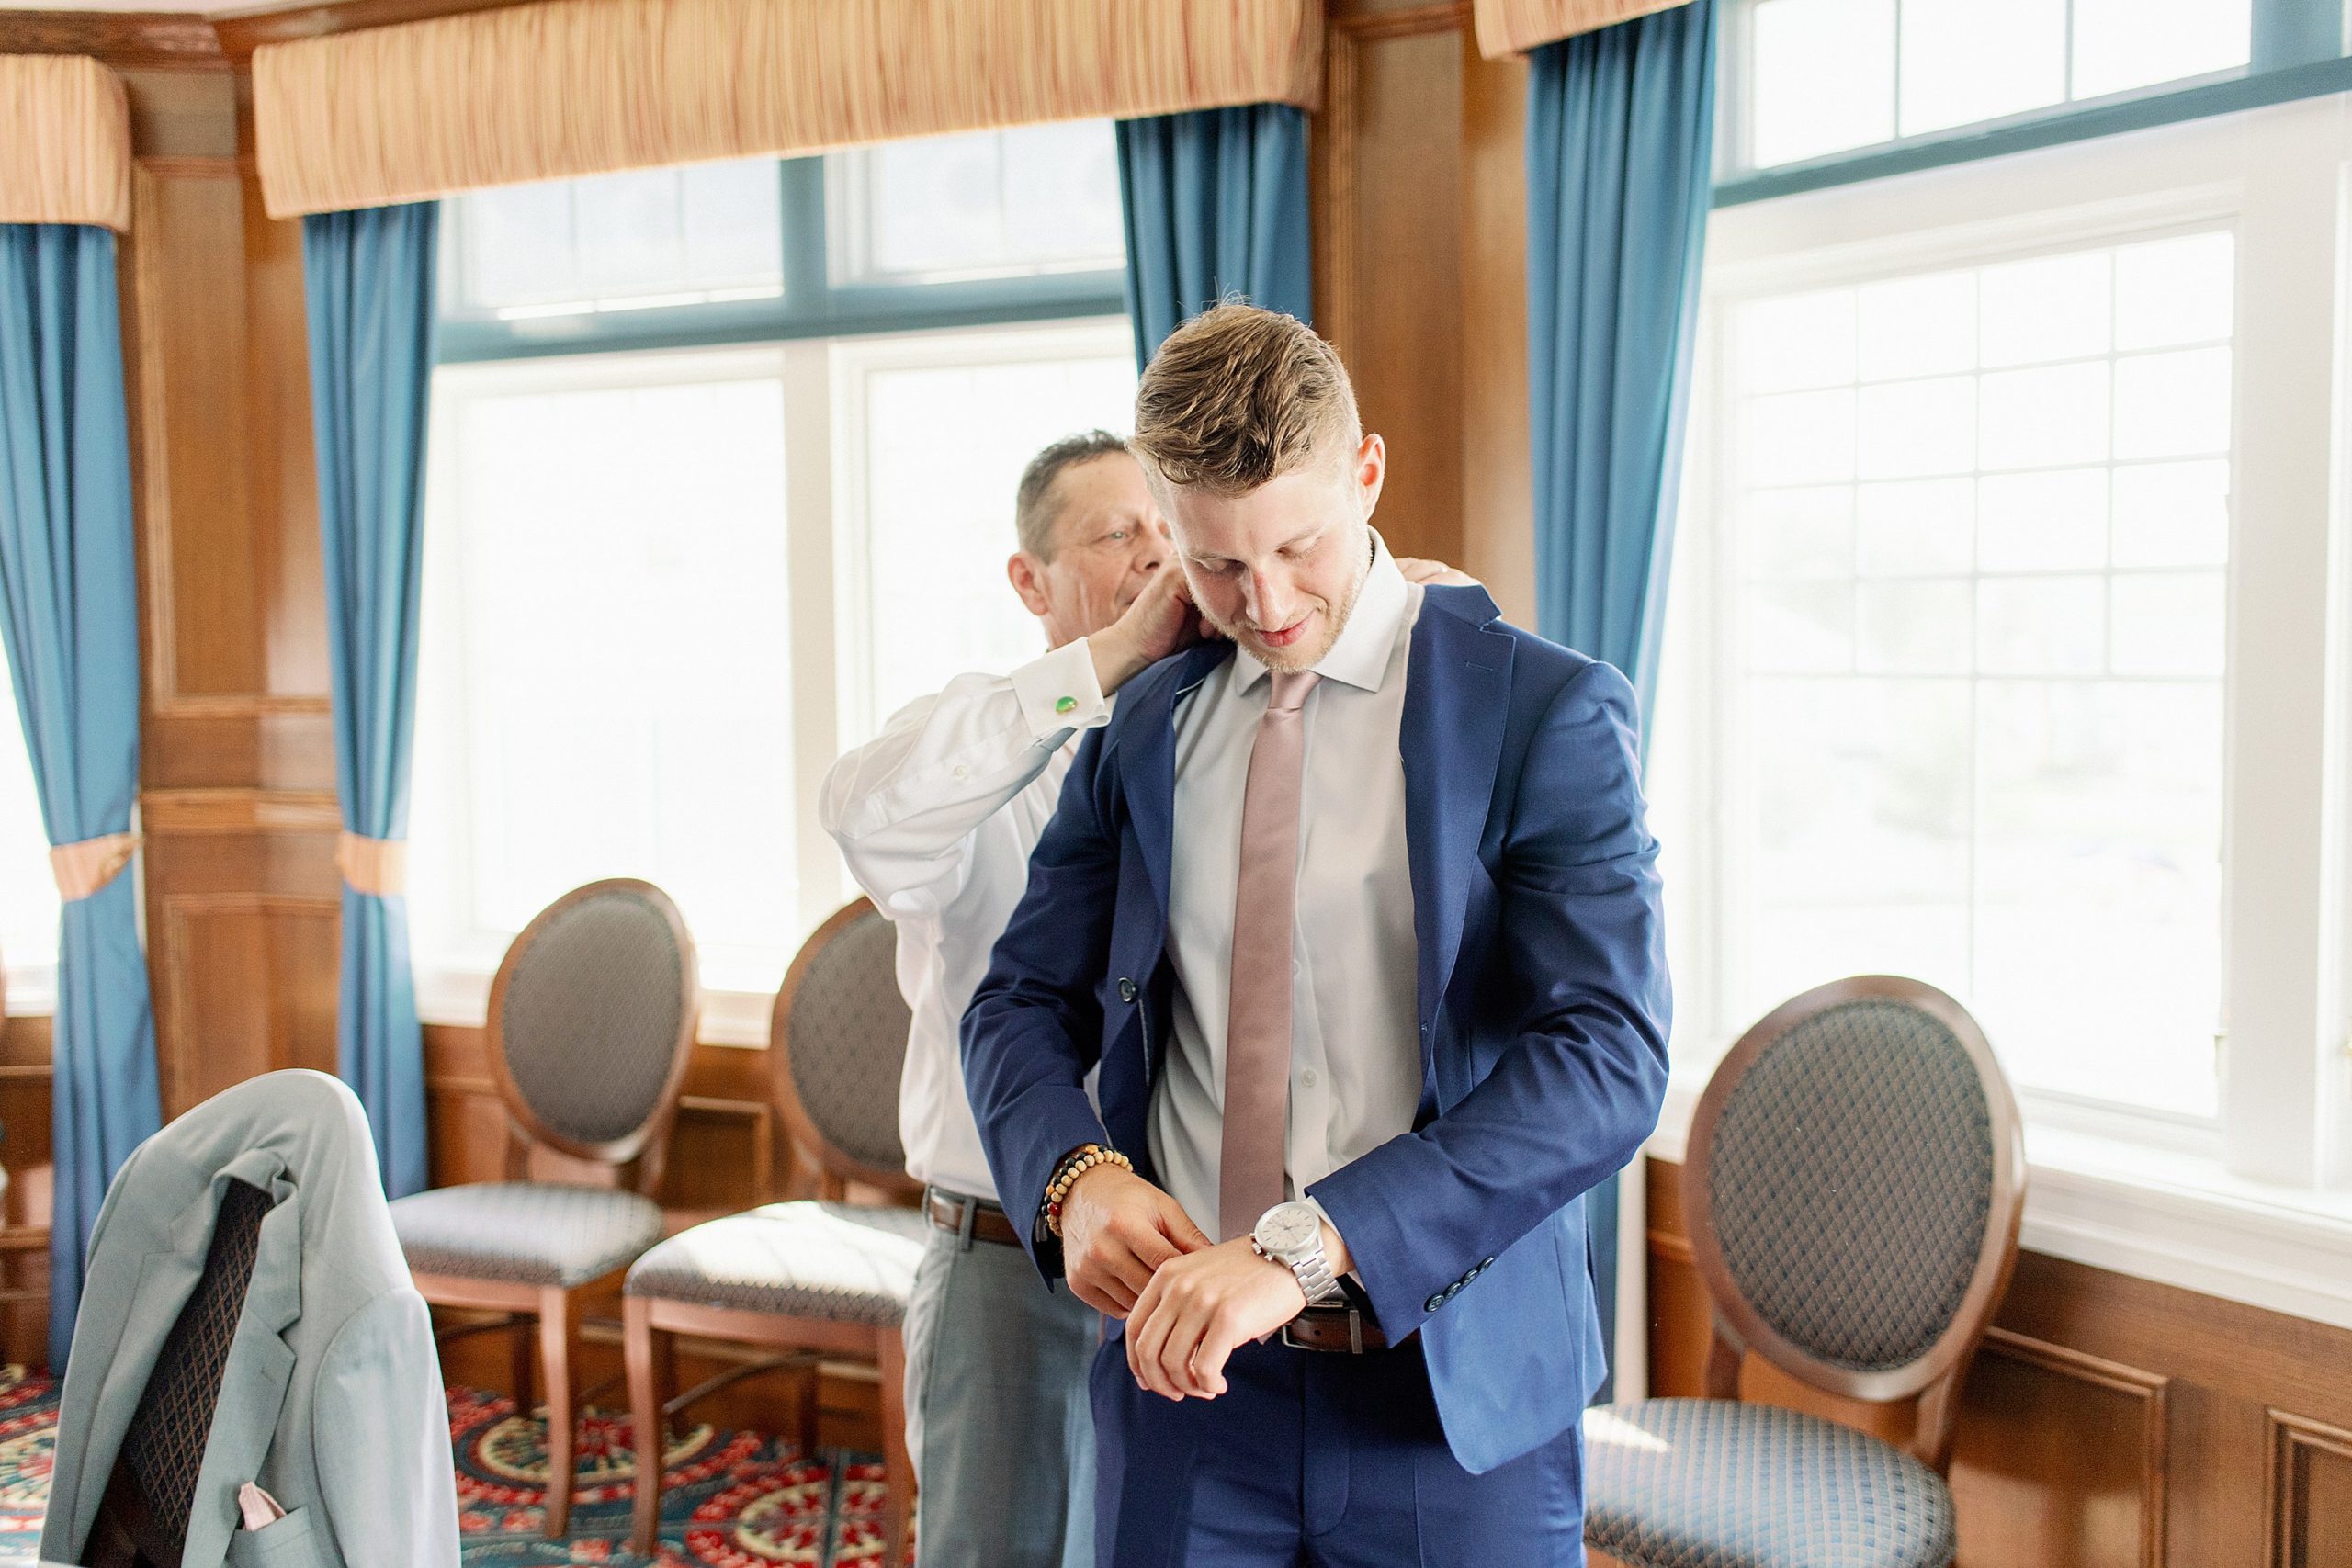 groom getting ready for micro wedding at madison beach hotel